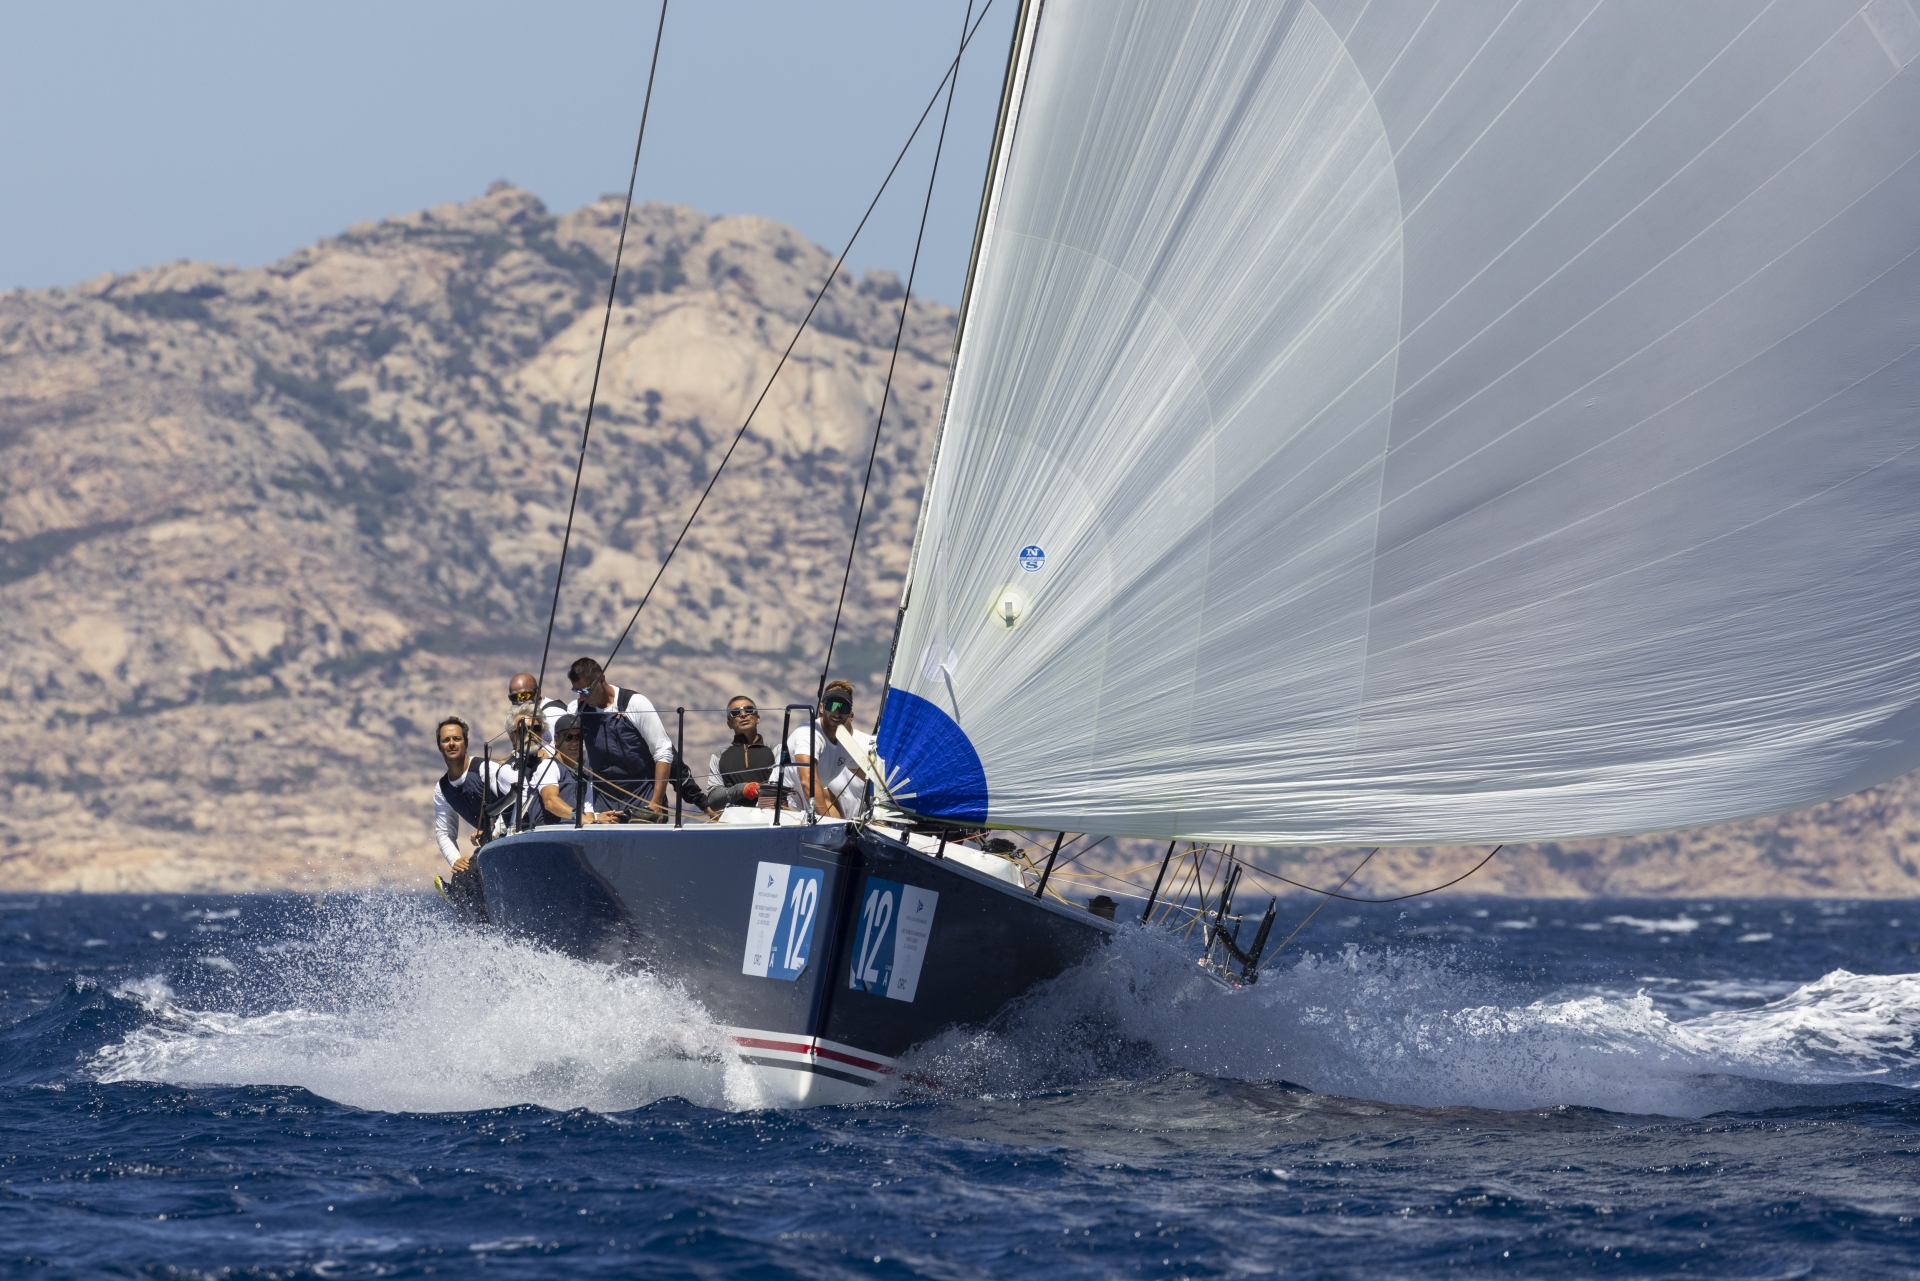 Another exciting inshore race day at the 2022 ORC World Championship - Press Release - Yacht Club Costa Smeralda